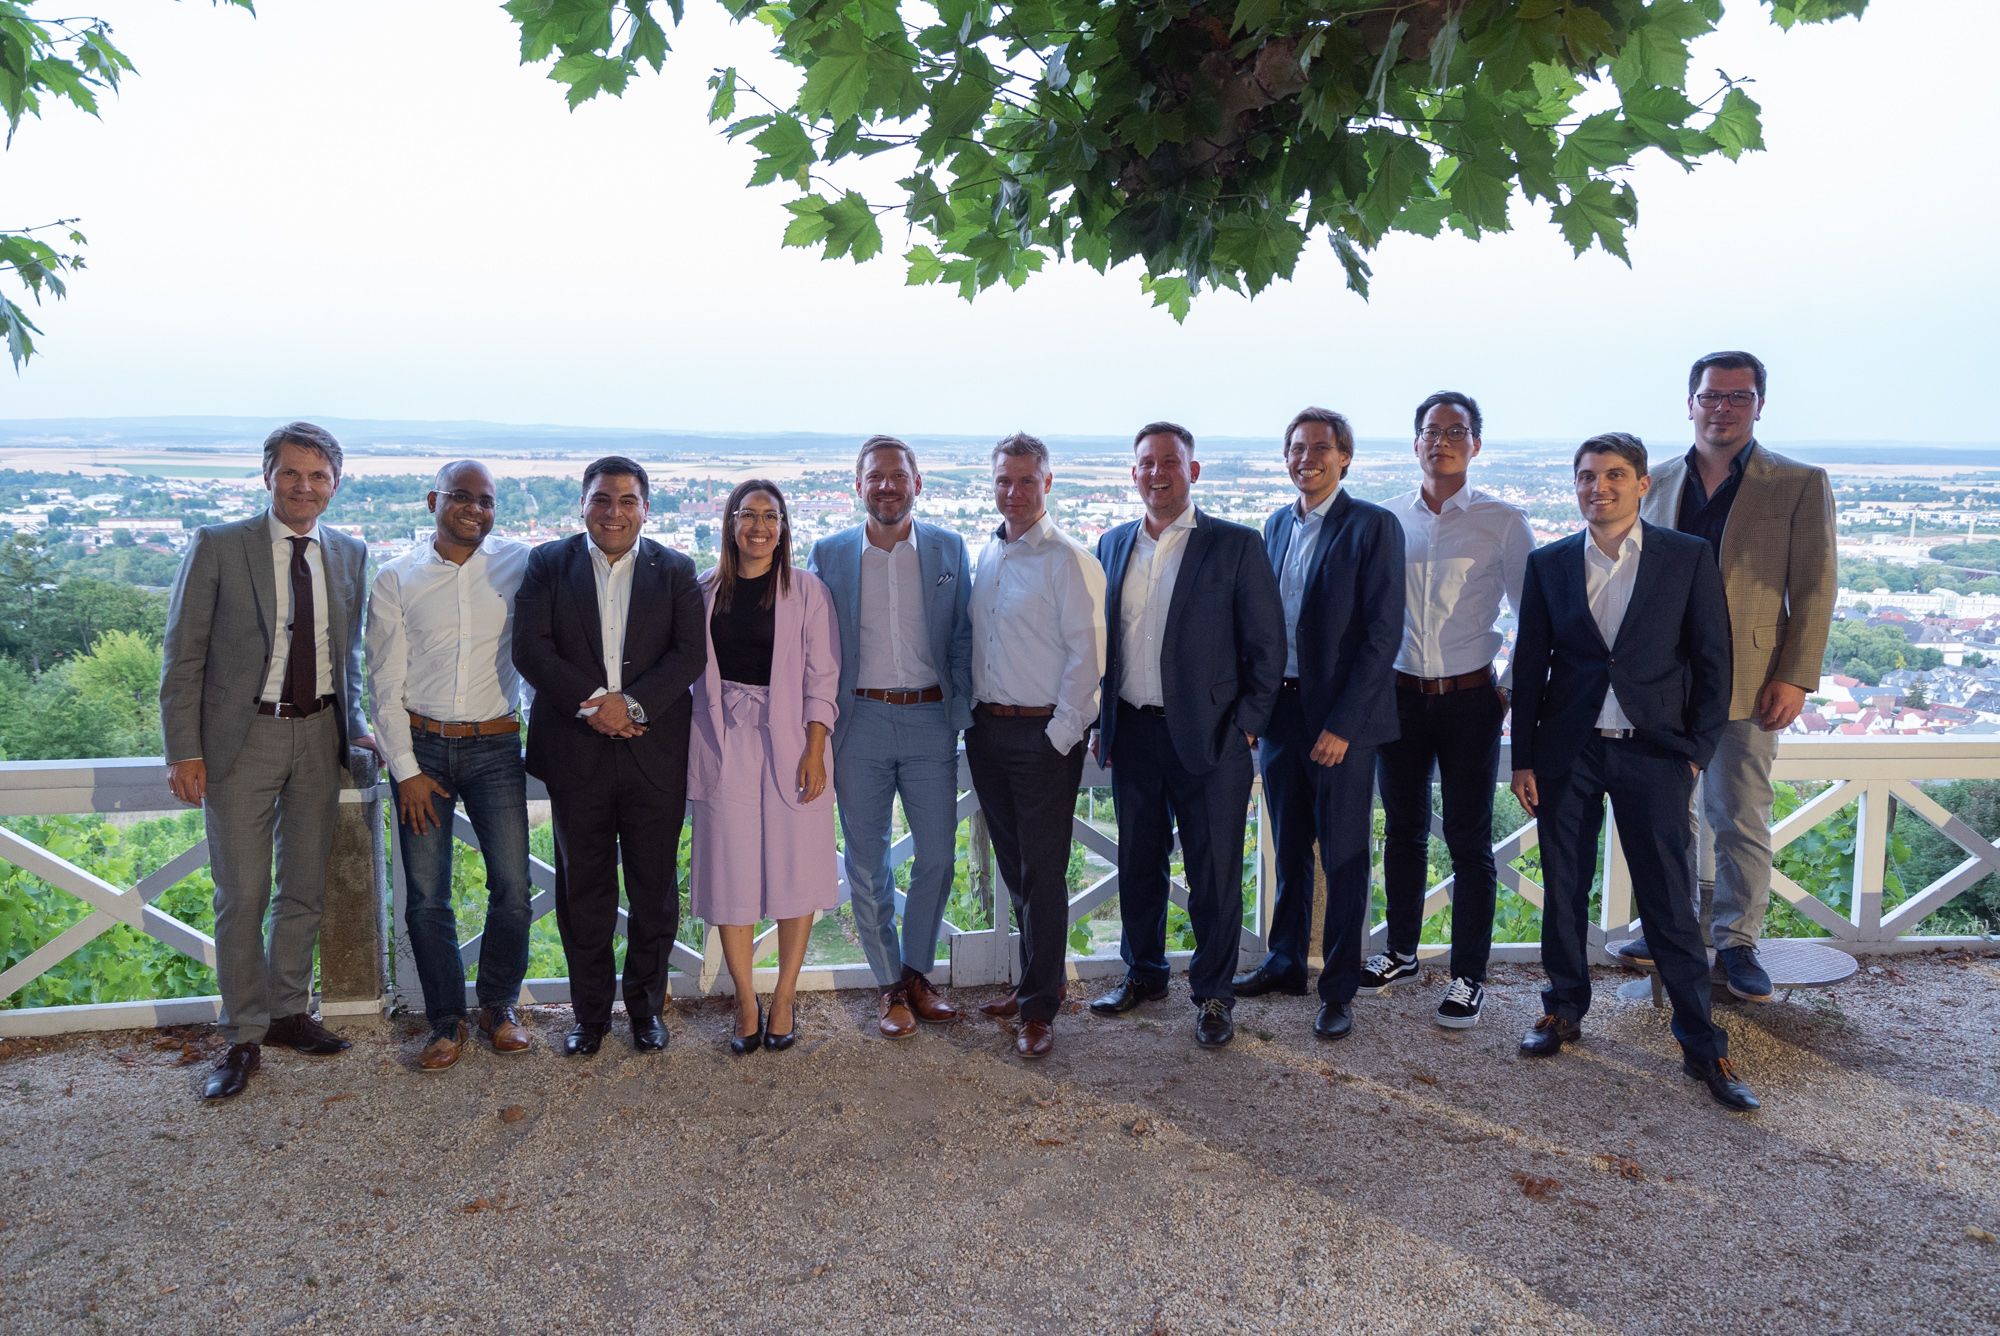 Group photo of the 16th and 17th cohort of MBA graduates in Bad Nauheim